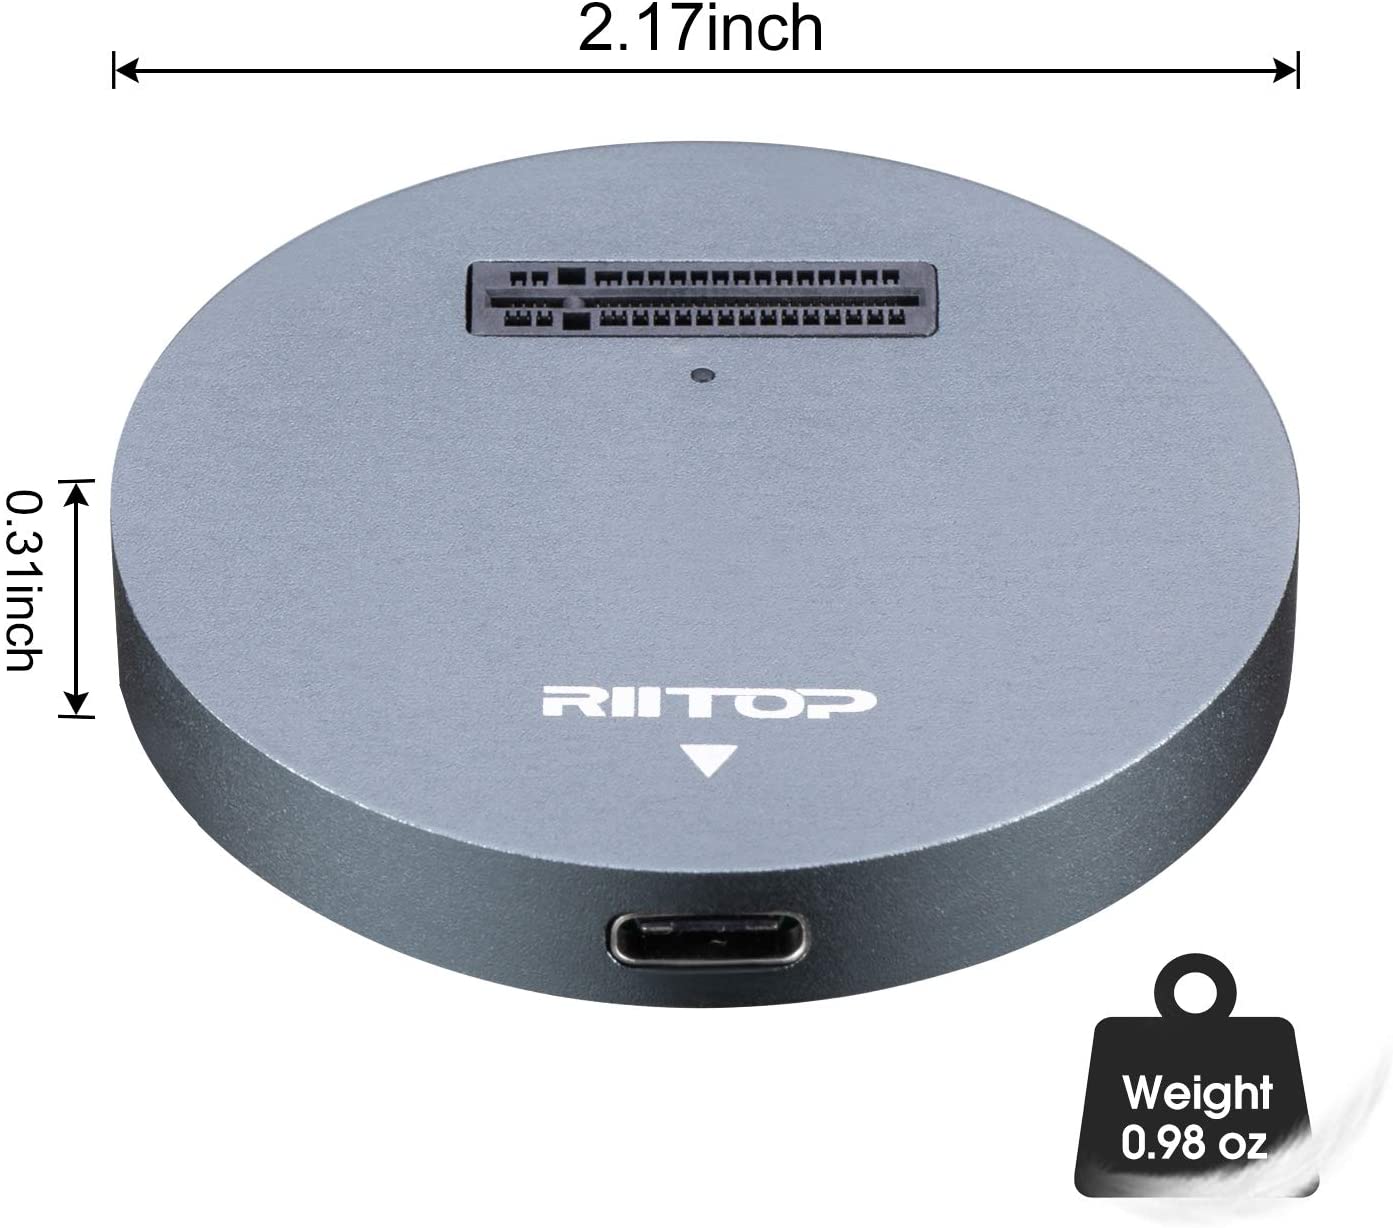 M.2 to USB Docking Station, RIITOP M.2 SSD to USB-C Reader Adapter for